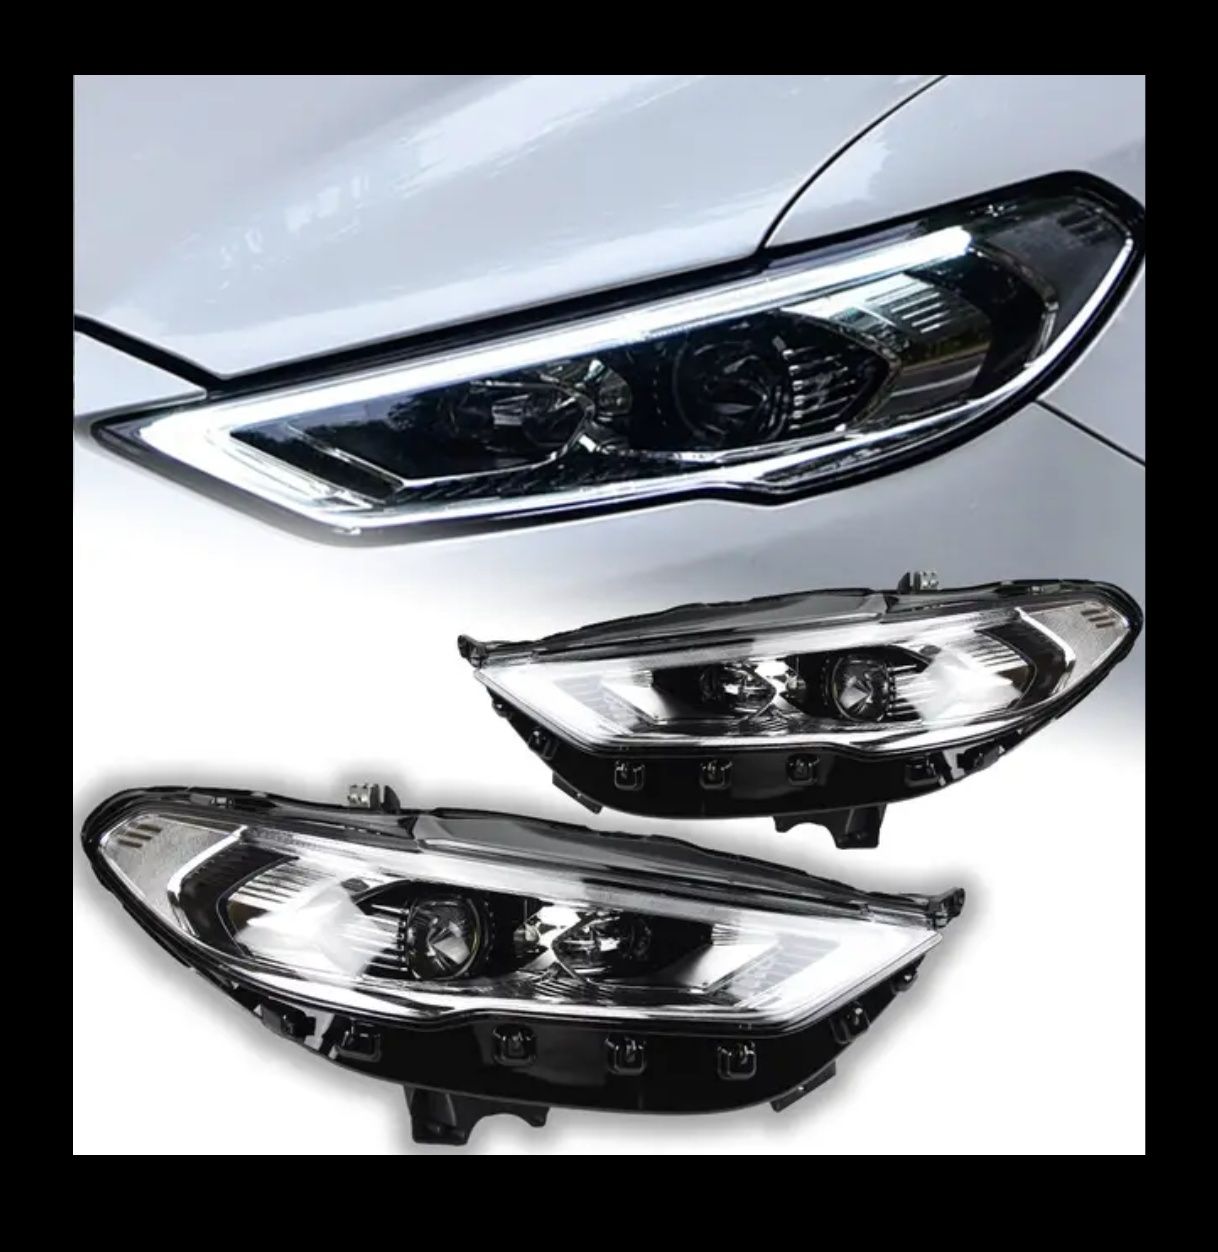 Фары Ford Fusion 2017-2020 Full Led